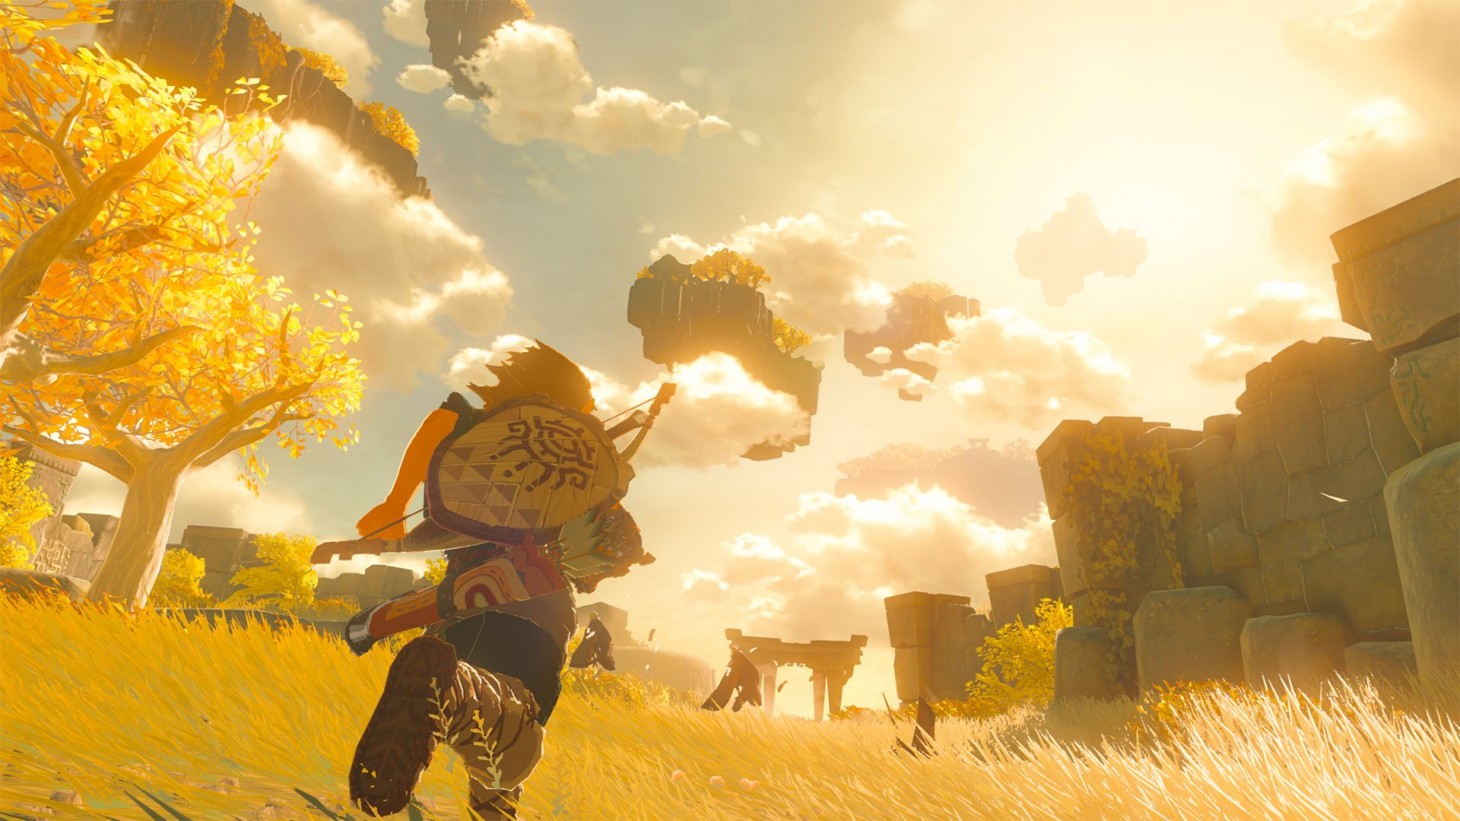 Legend of Zelda: The Cultural Impact and Breath of the Wild 2 Updates